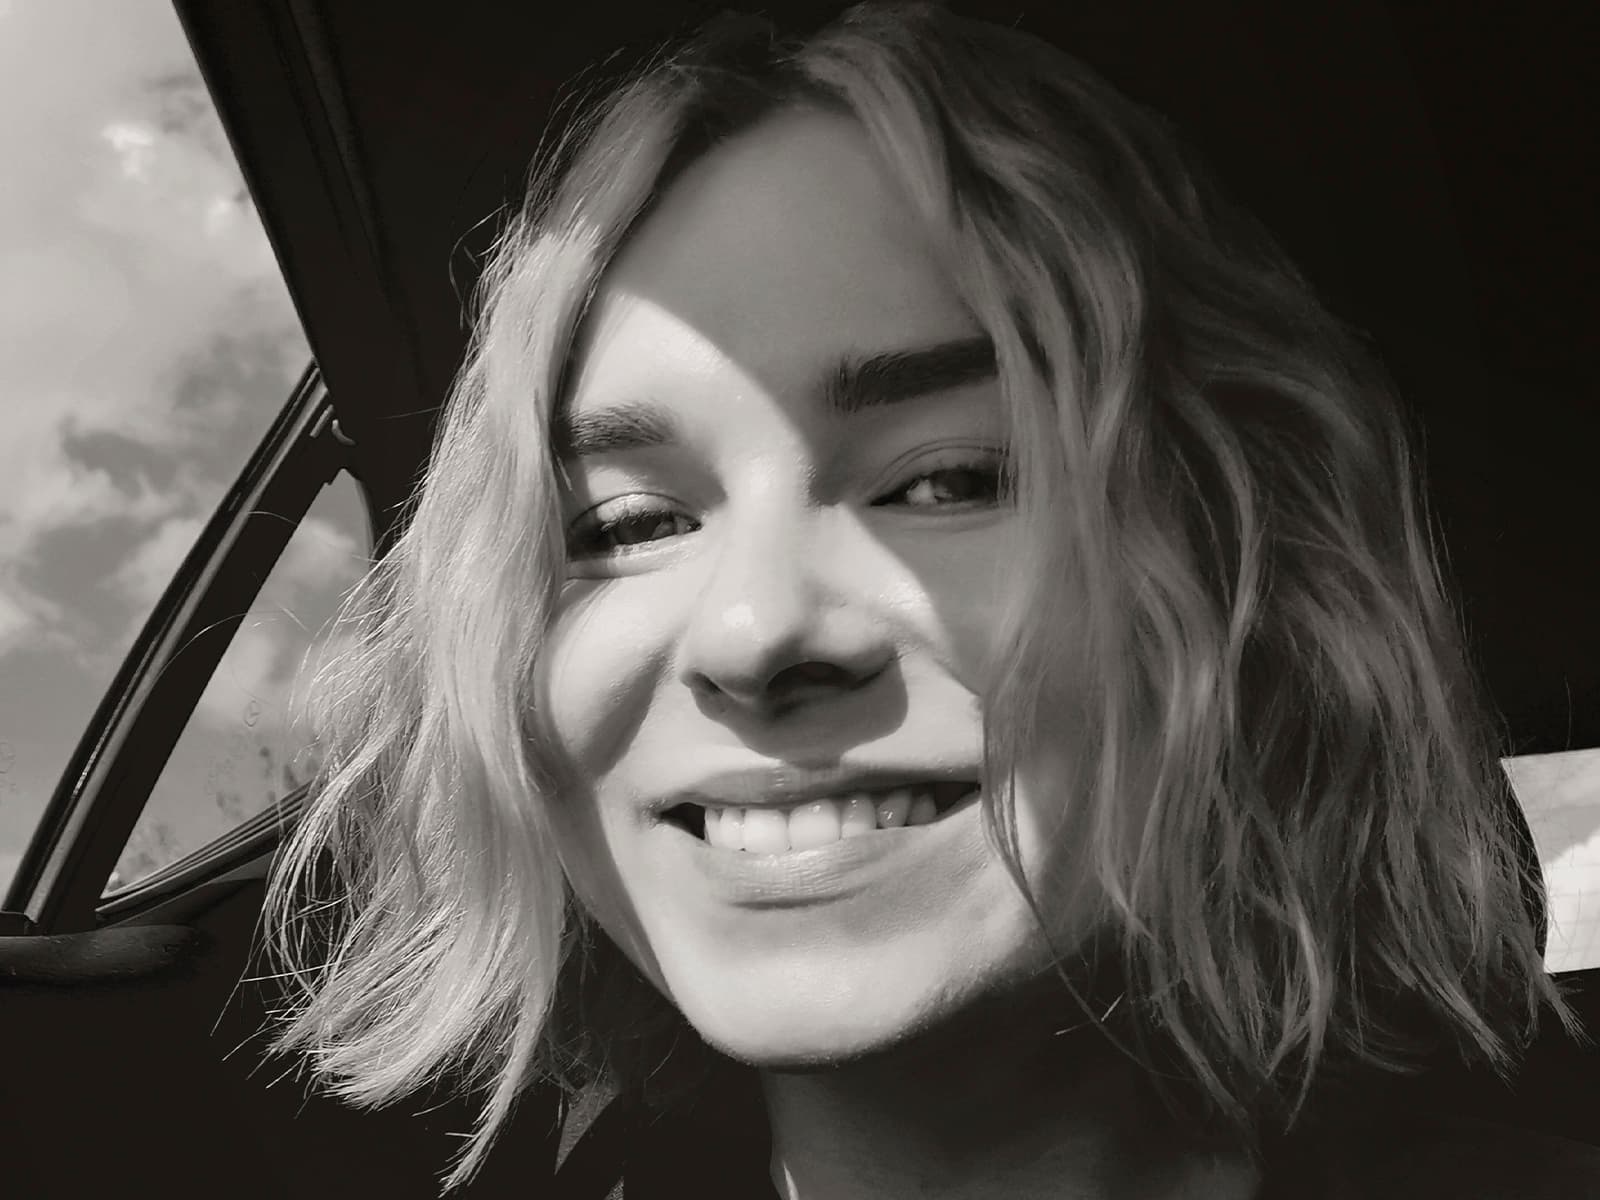 Black and white close-up of a girl's smiling face in a car